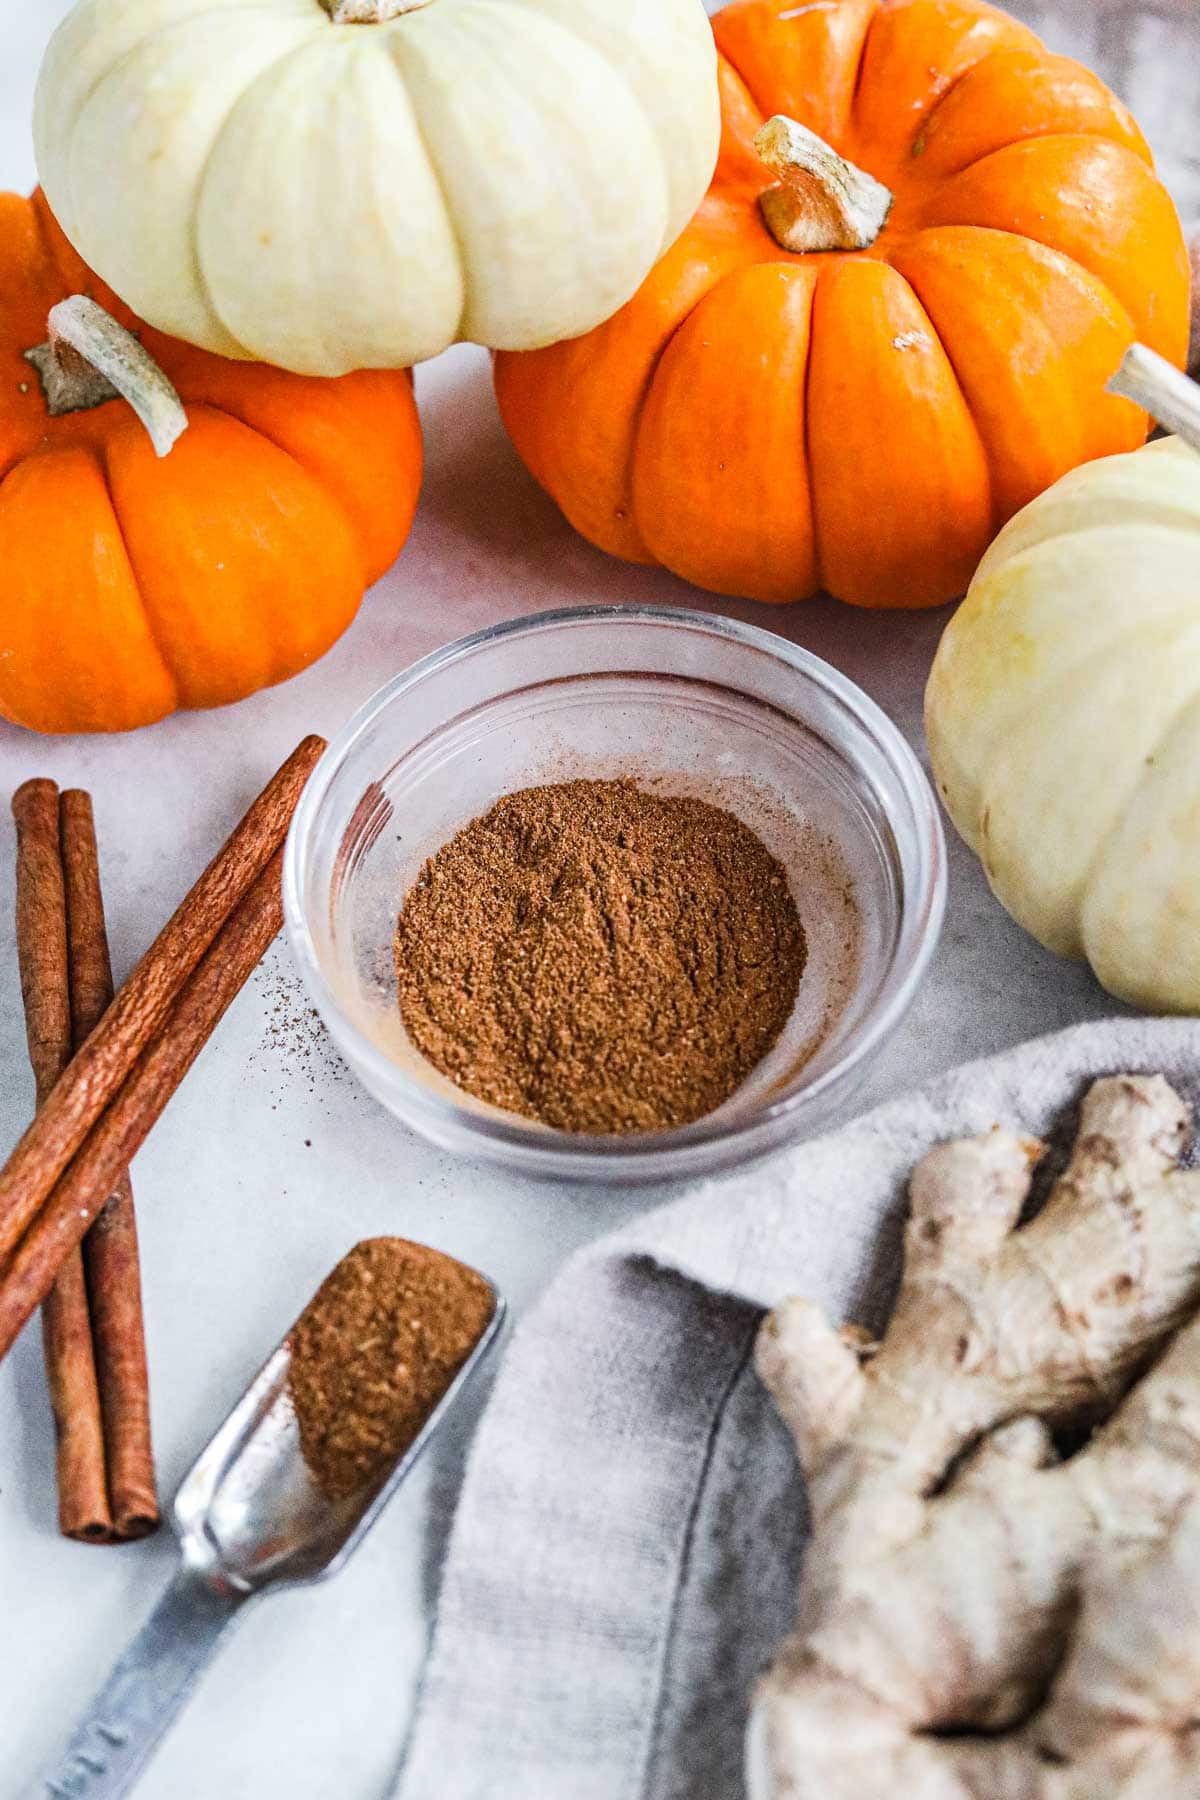 Homemade pumpkin spice made with cinnamon, ginger, cloves, nutmeg, and allspice to use for pumpkin pies, desserts, drinks, and more.